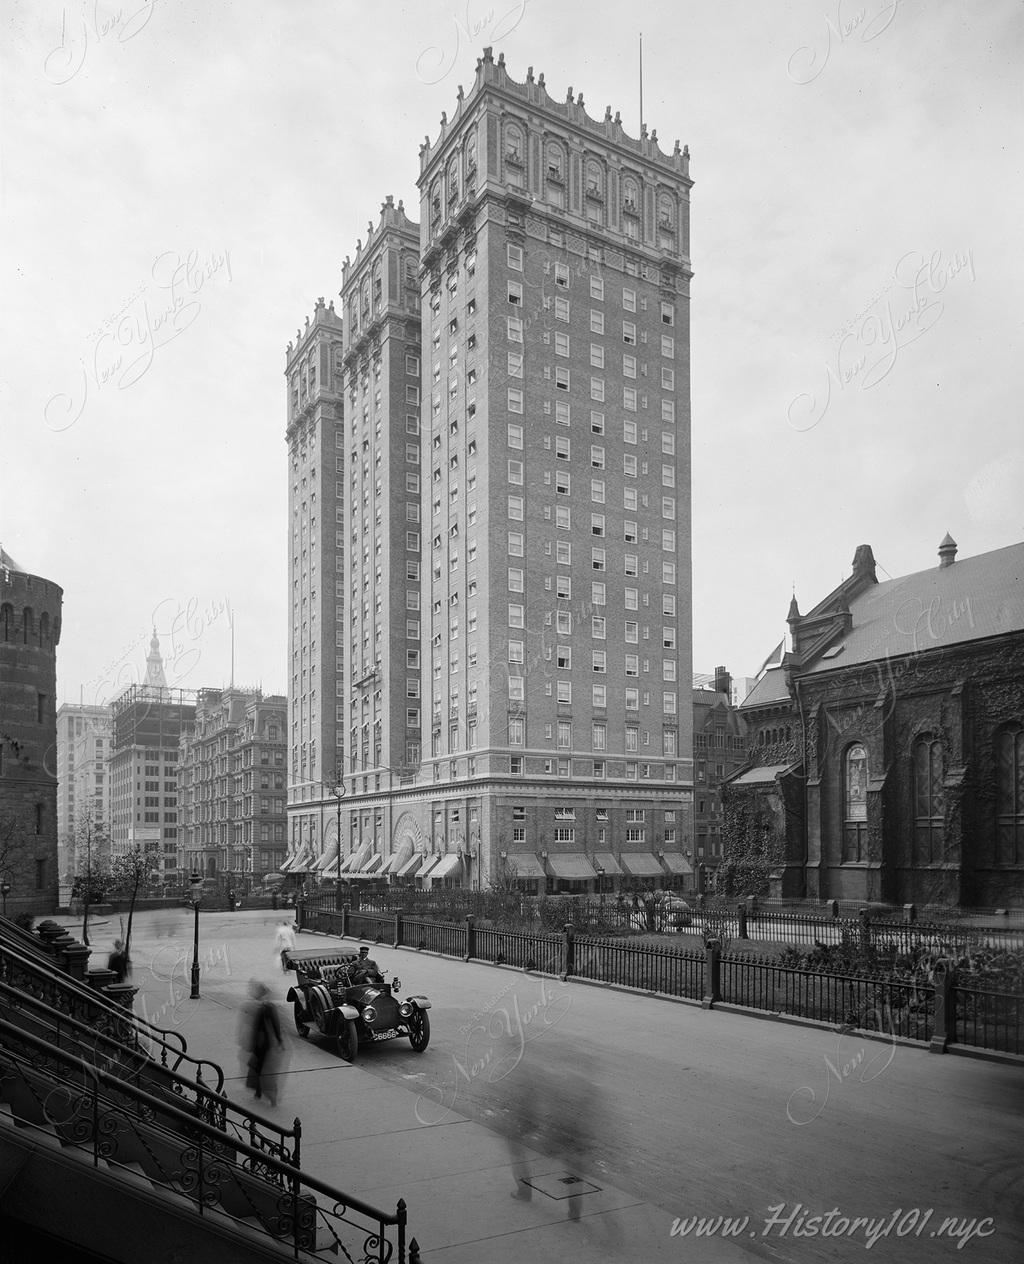 Discover the Vanderbilt Hotel, a 1913 NYC landmark, showcasing the city's architectural grandeur and cultural ascent in the early 20th century